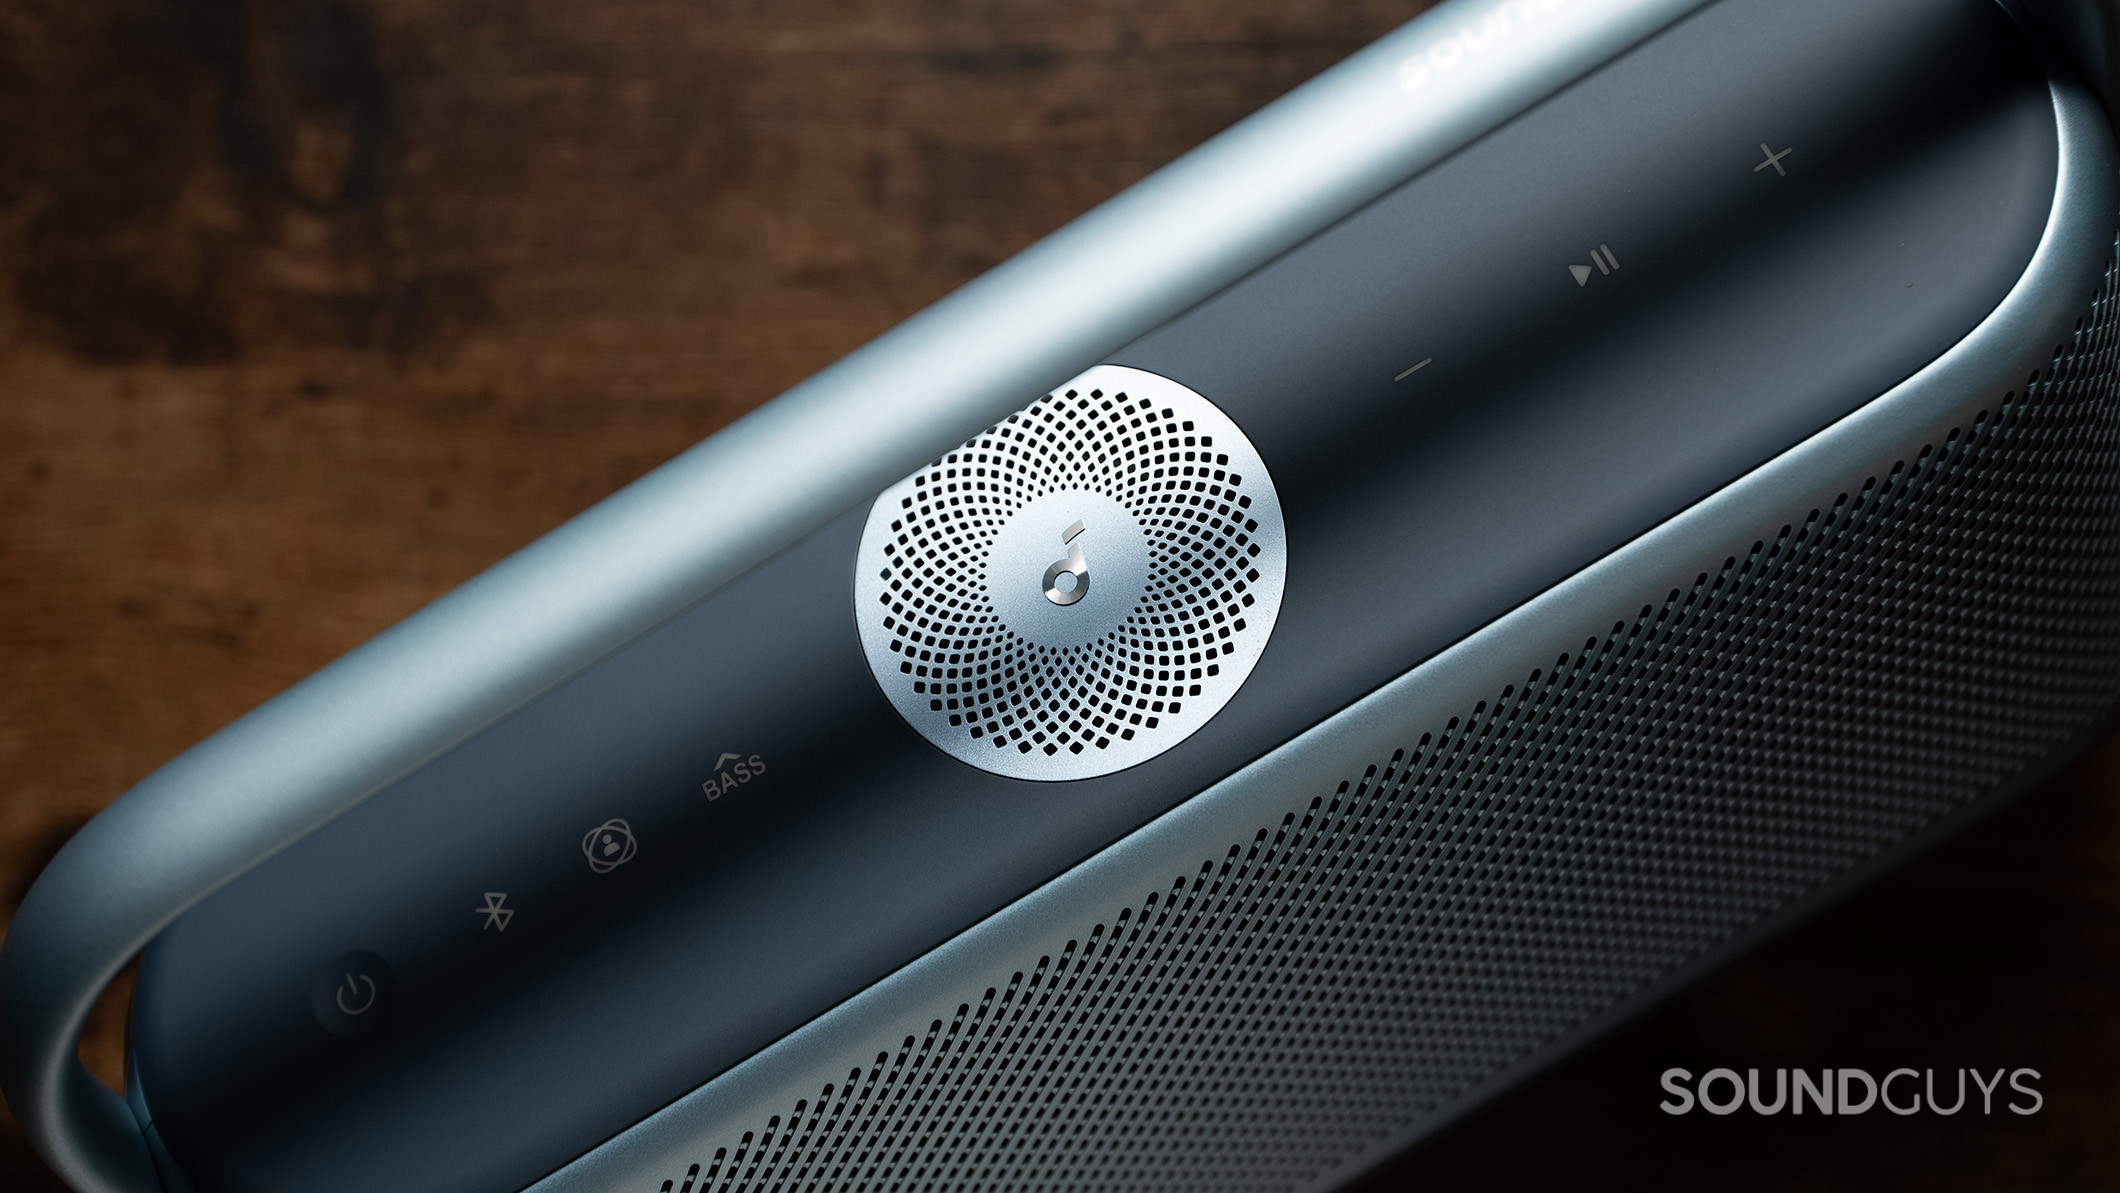 Top of the Anker Soundcore Motion X600 speaker with button controls and an upward firing driver. 